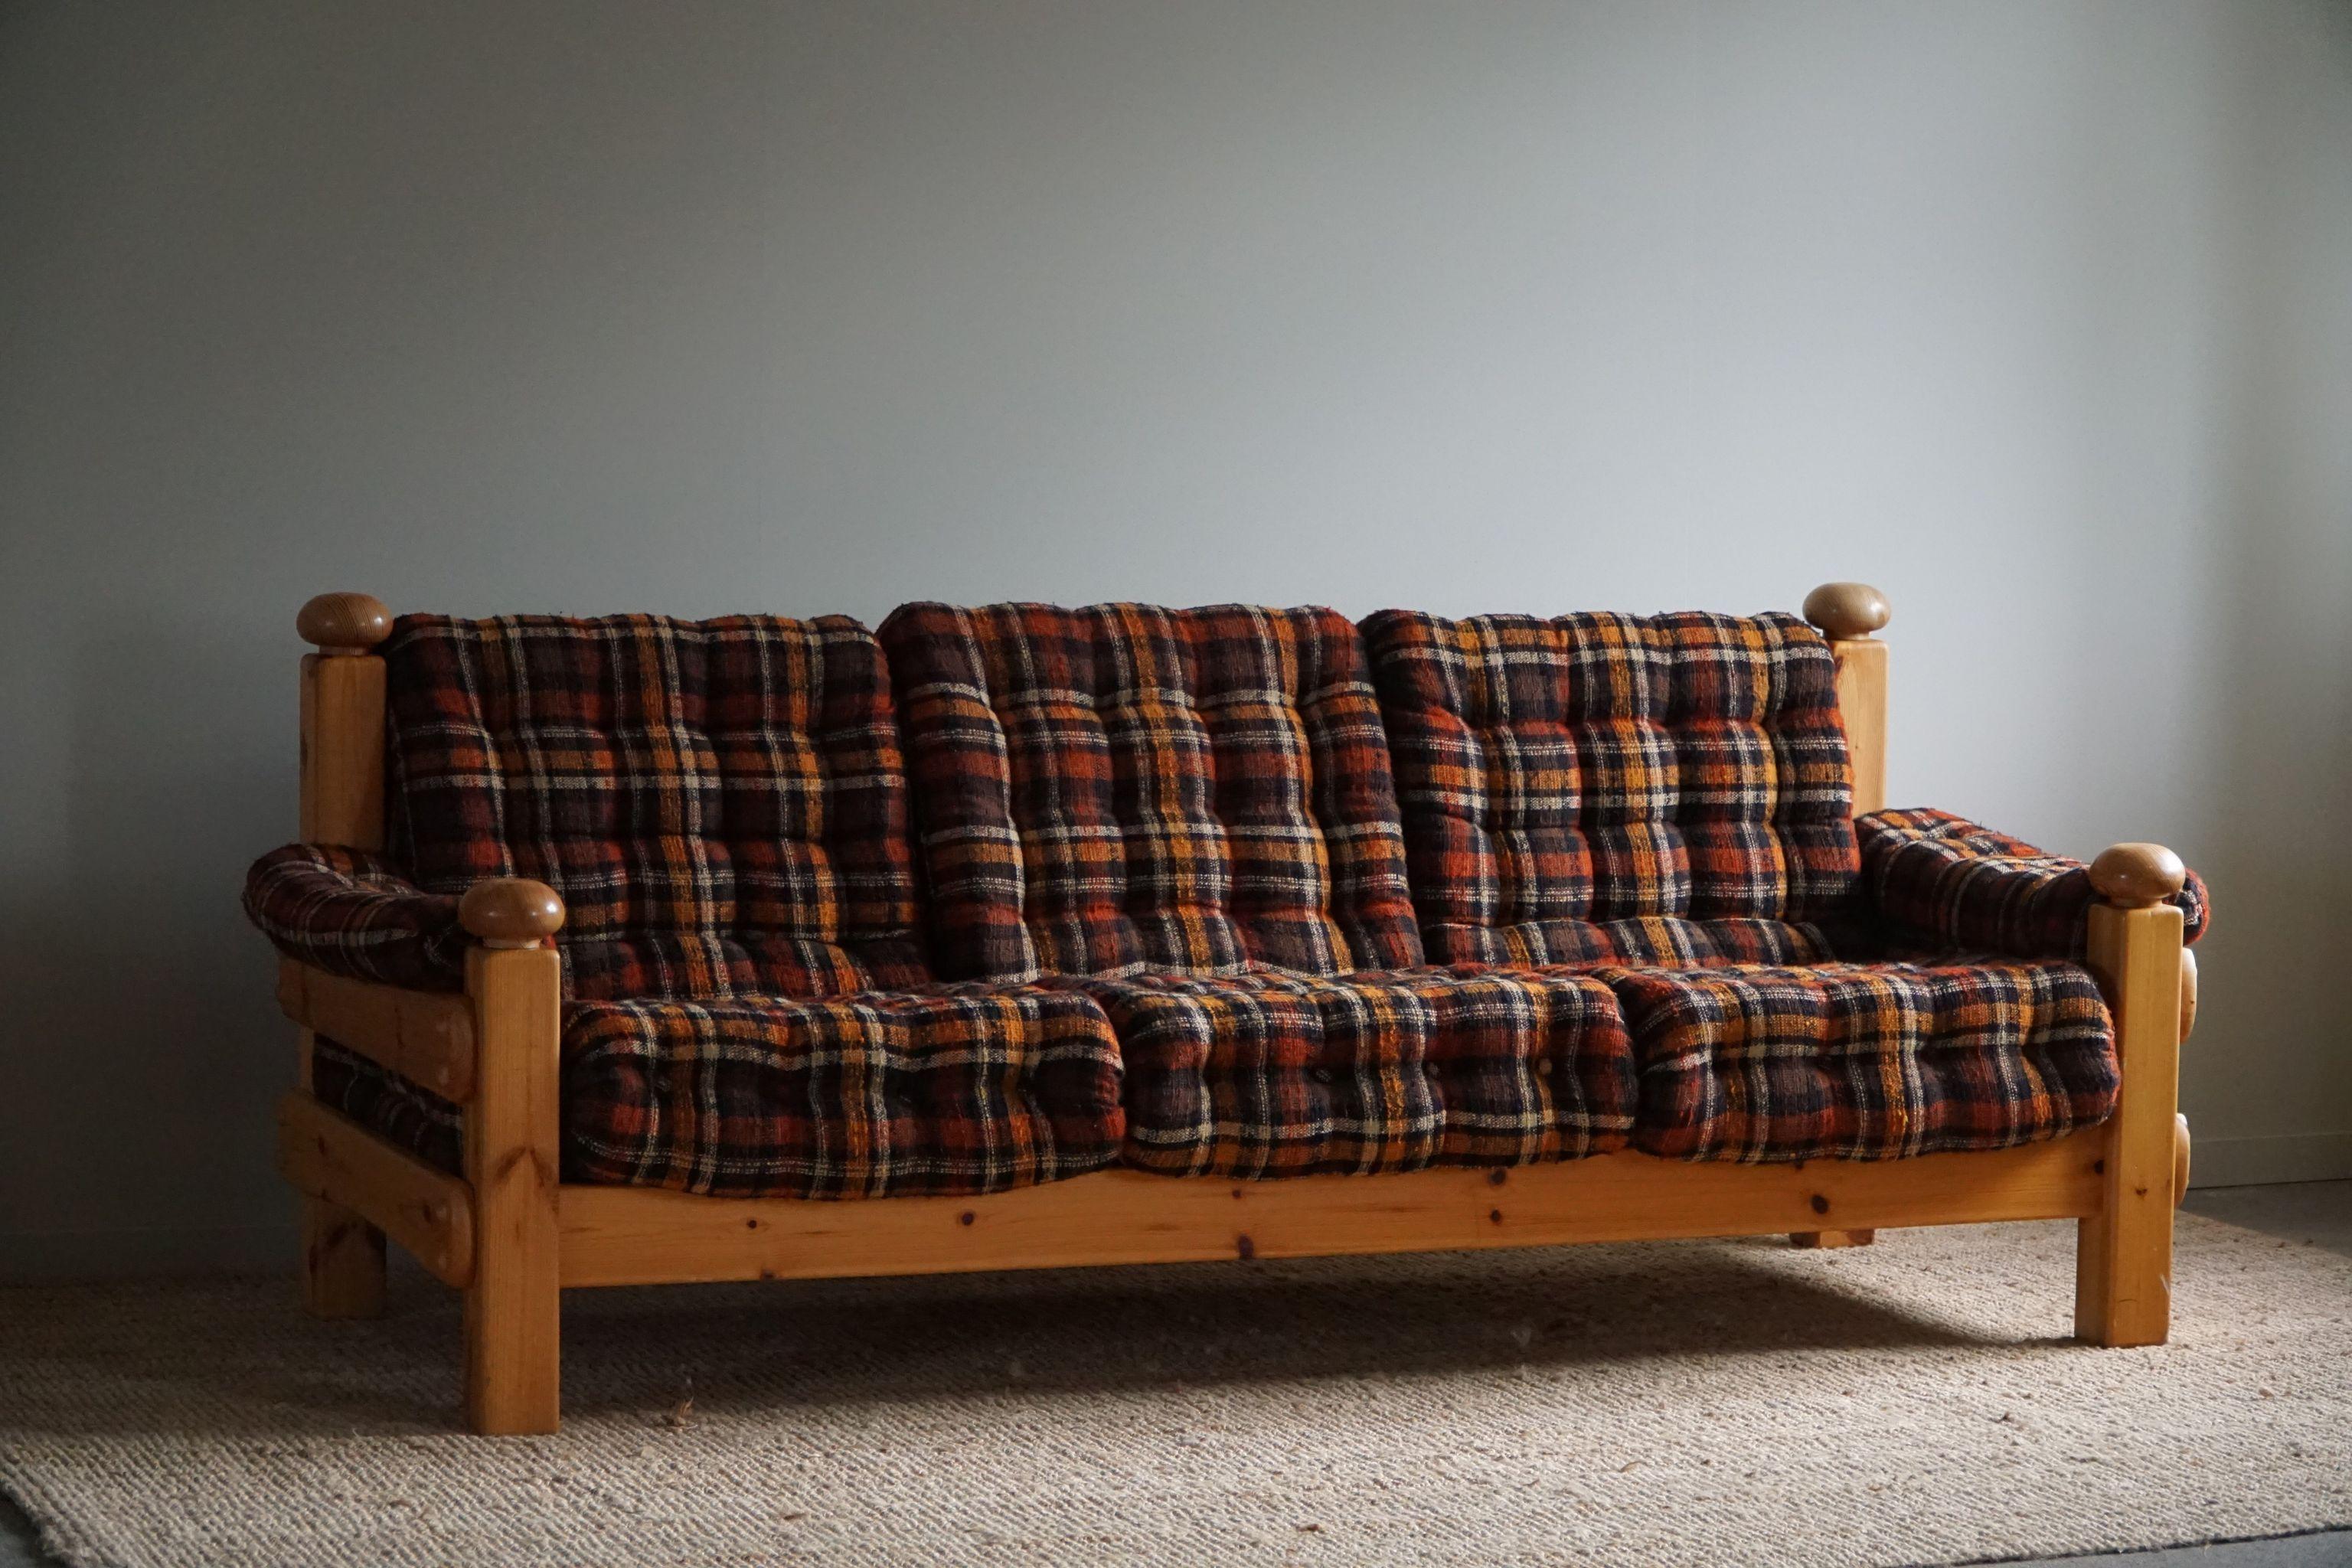 Three Seater Brutalist Sofa in Solid Pine, Swedish Modern, Made in the 1970s For Sale 11